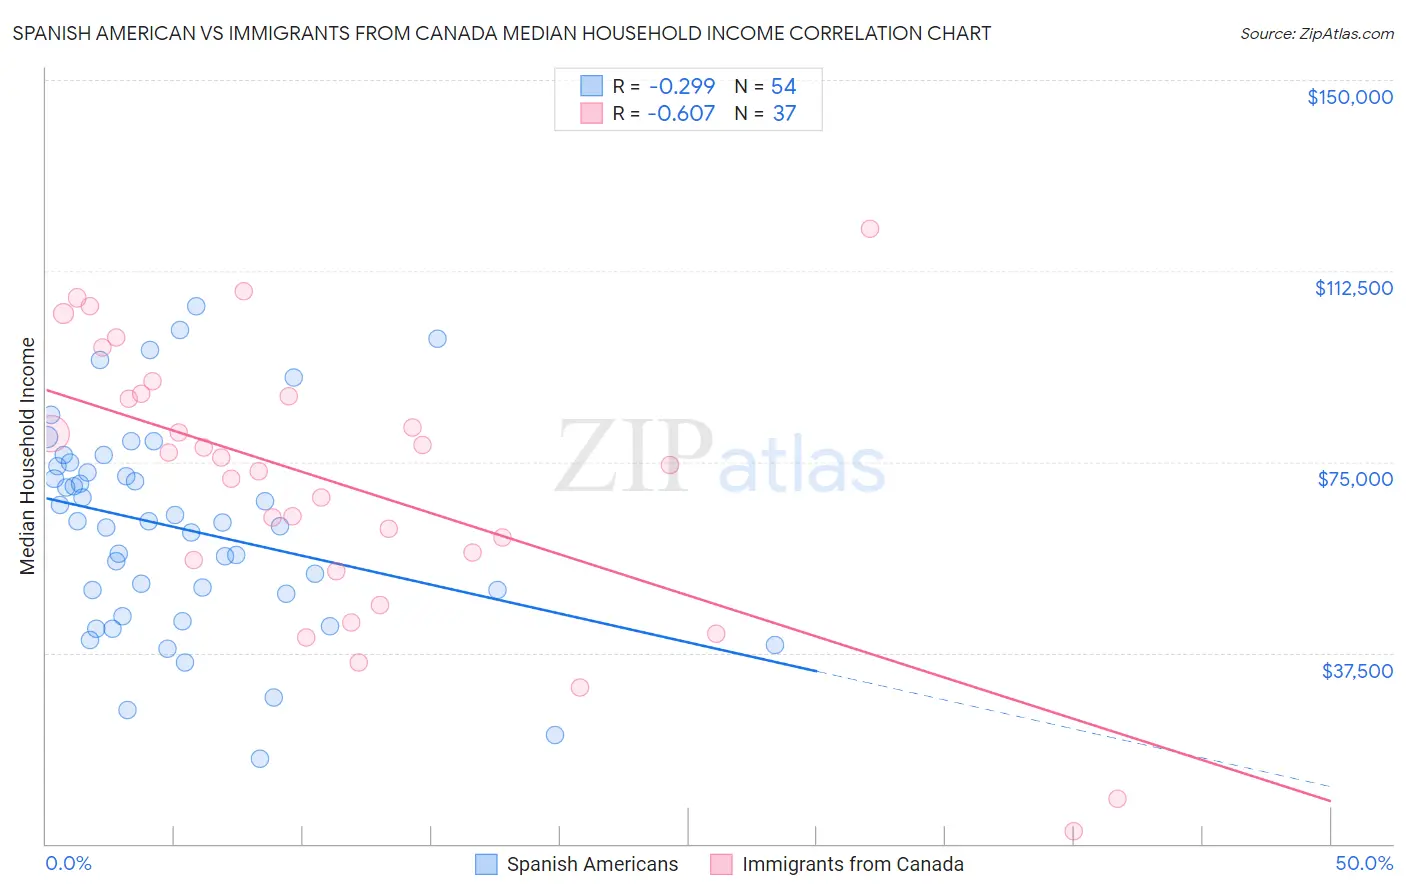 Spanish American vs Immigrants from Canada Median Household Income